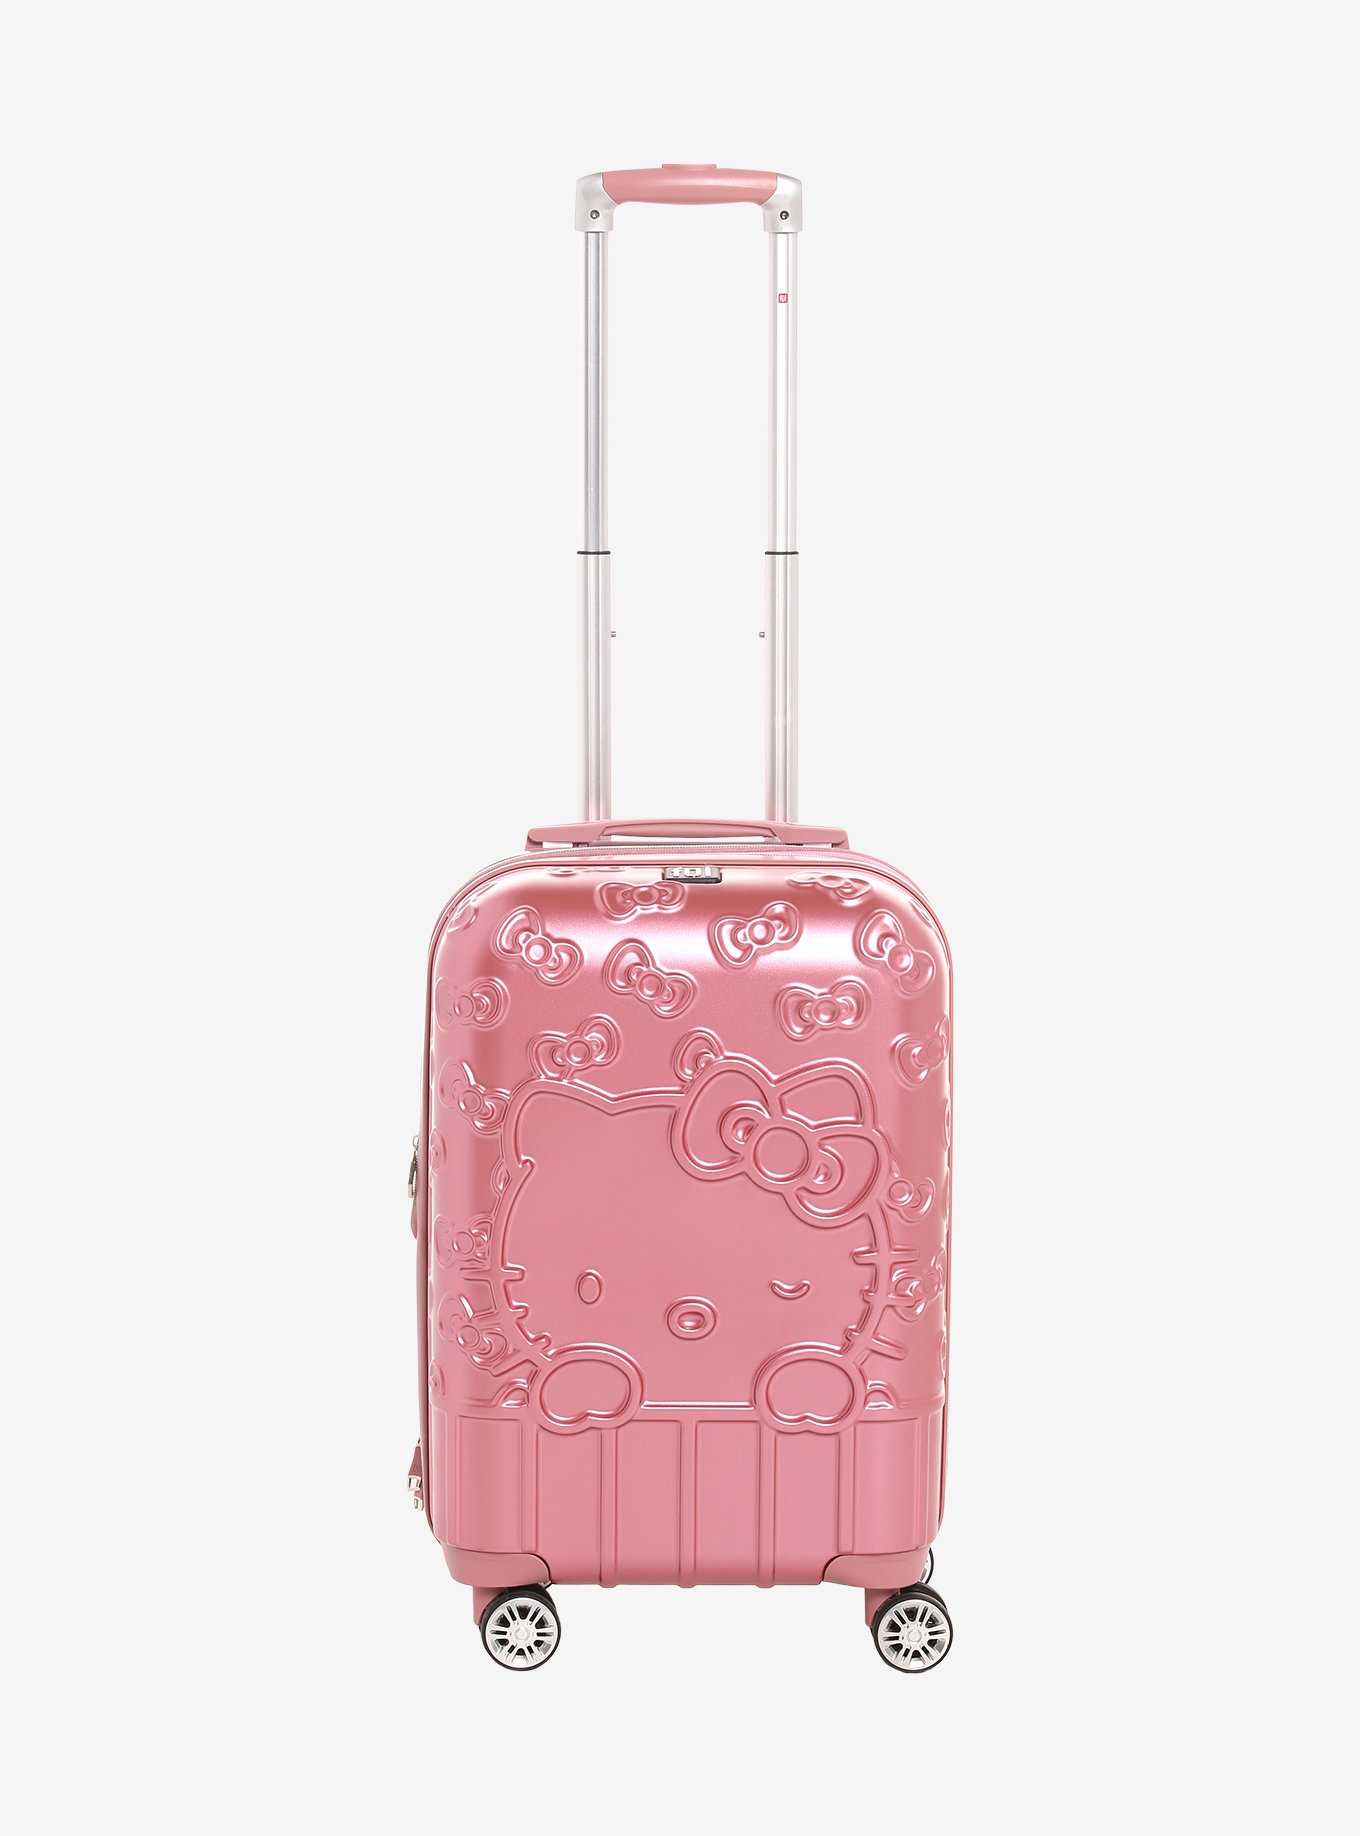 FUL Sanrio Hello Kitty Portrait Suitcase - BoxLunch Exclusive, , hi-res